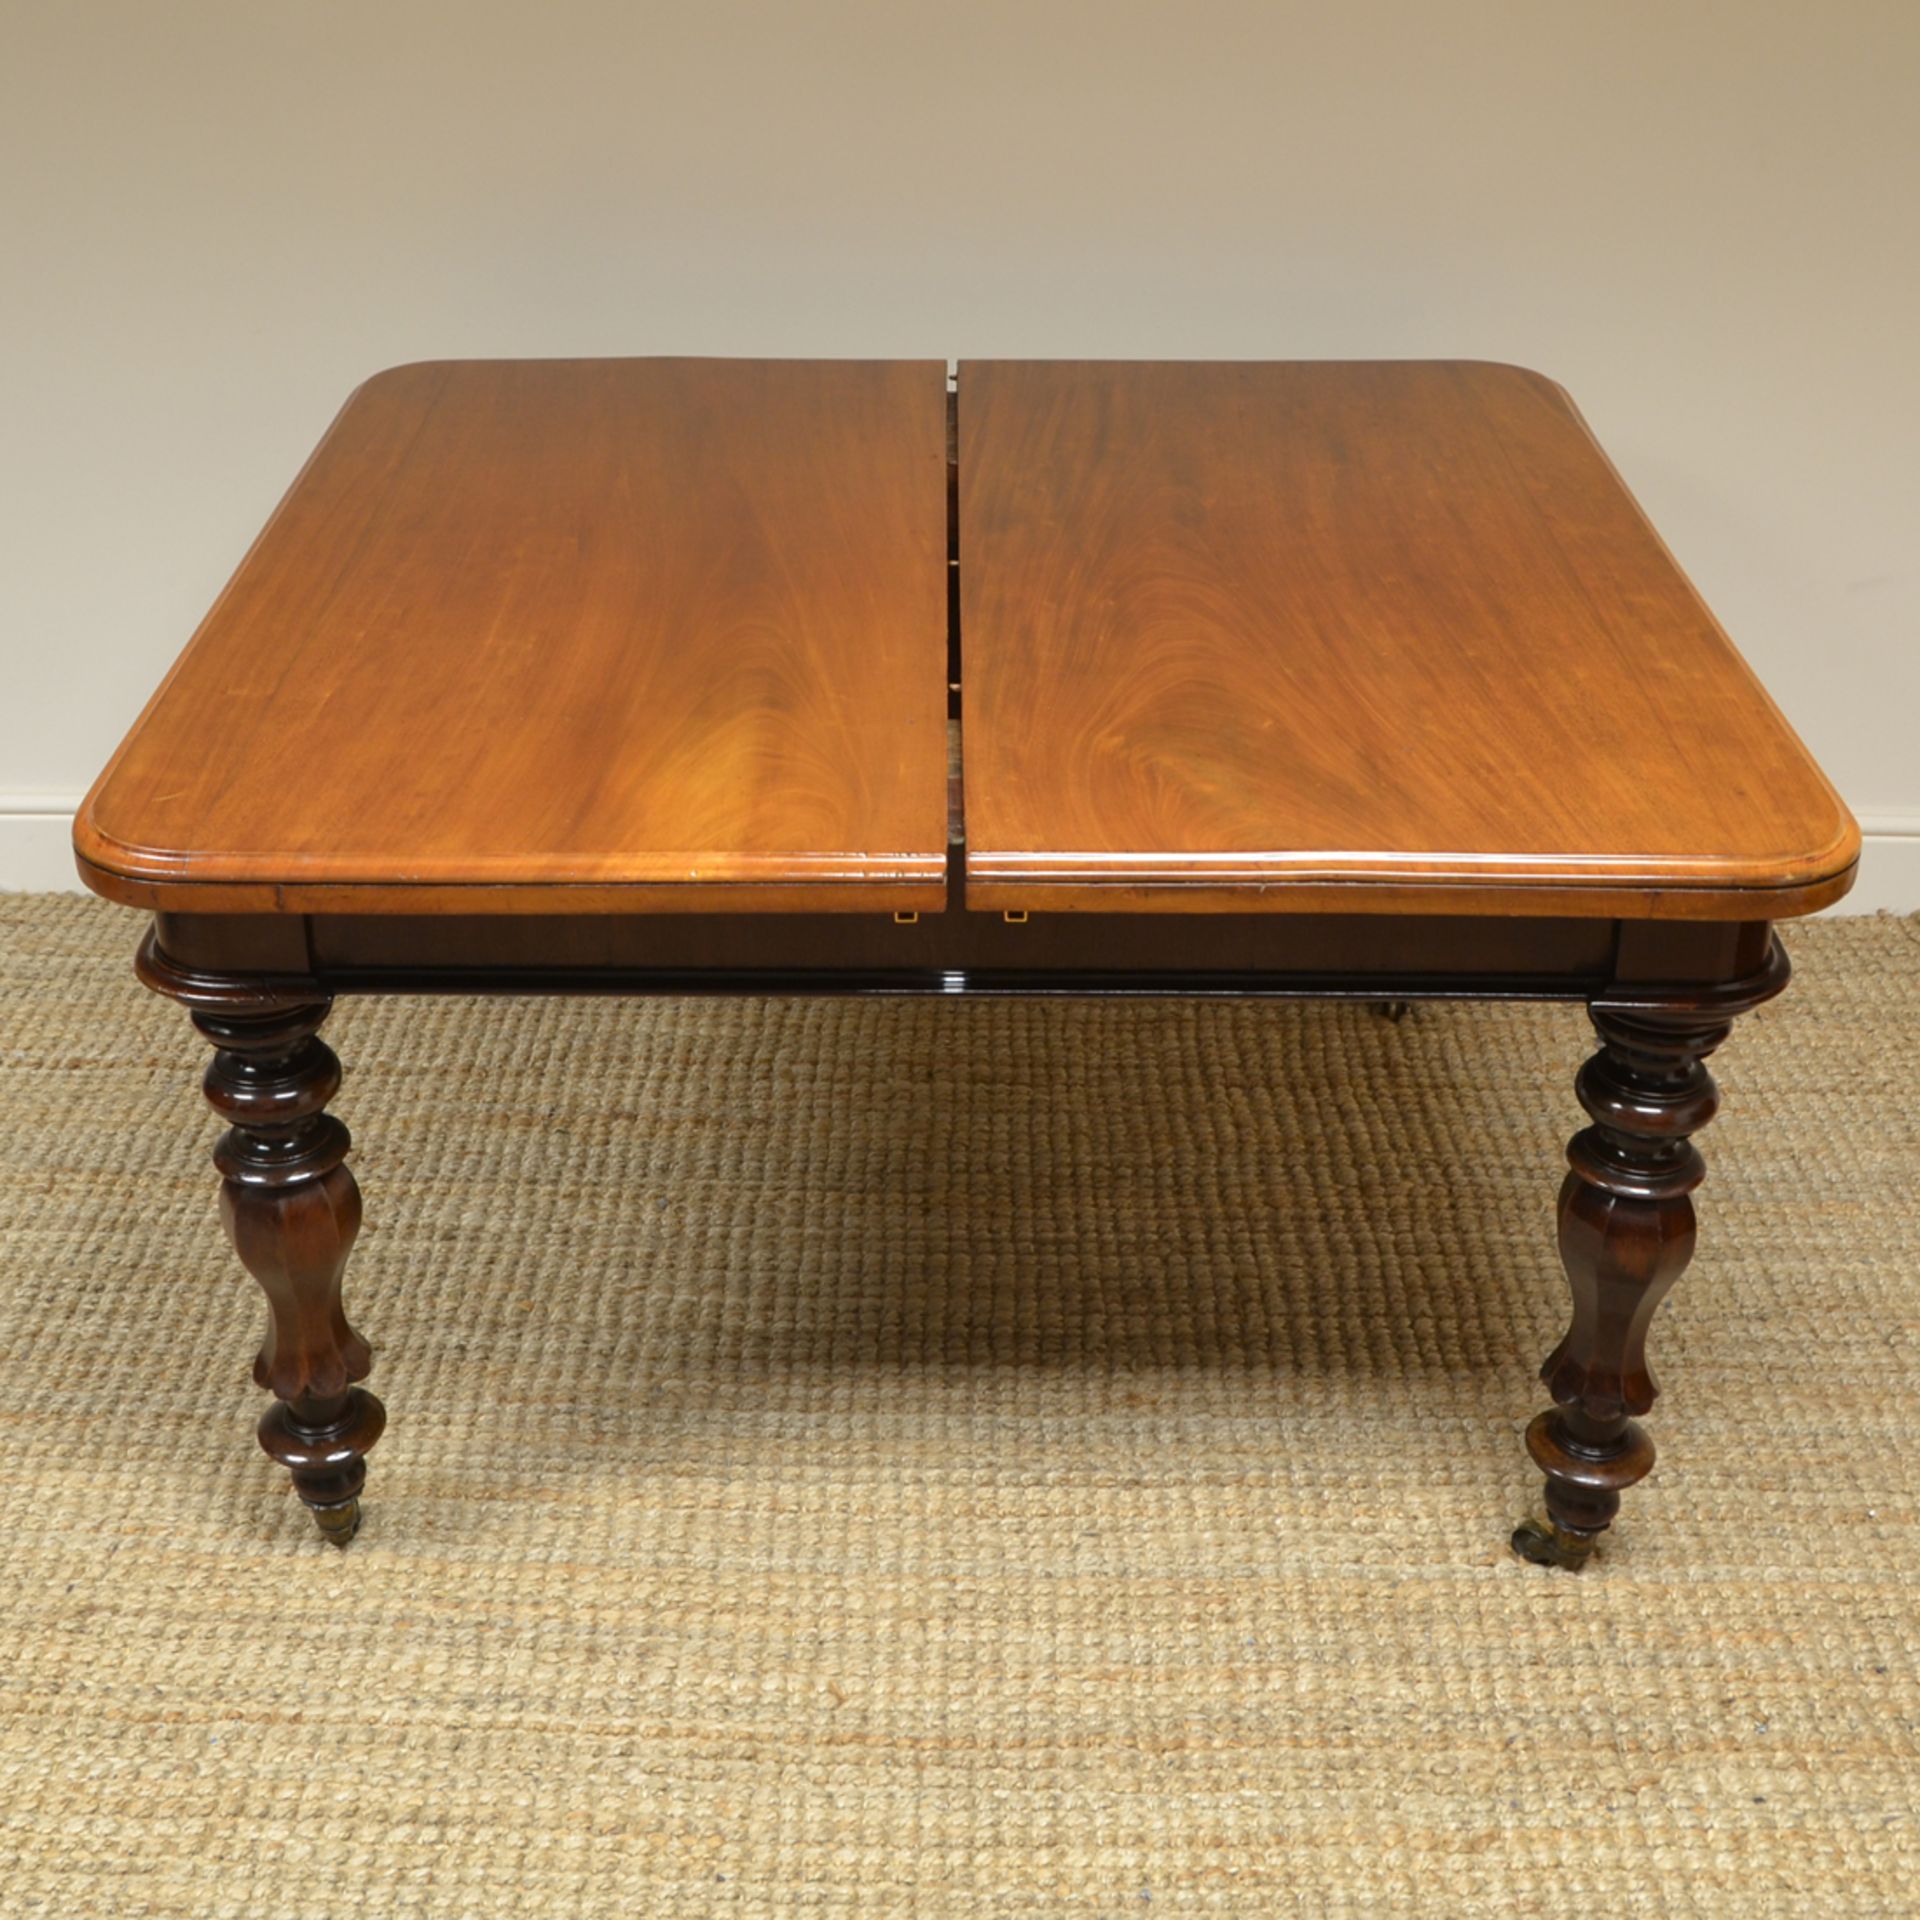 Spectacular Large Figured Mahogany Victorian Antique Dining Table. - Image 8 of 8